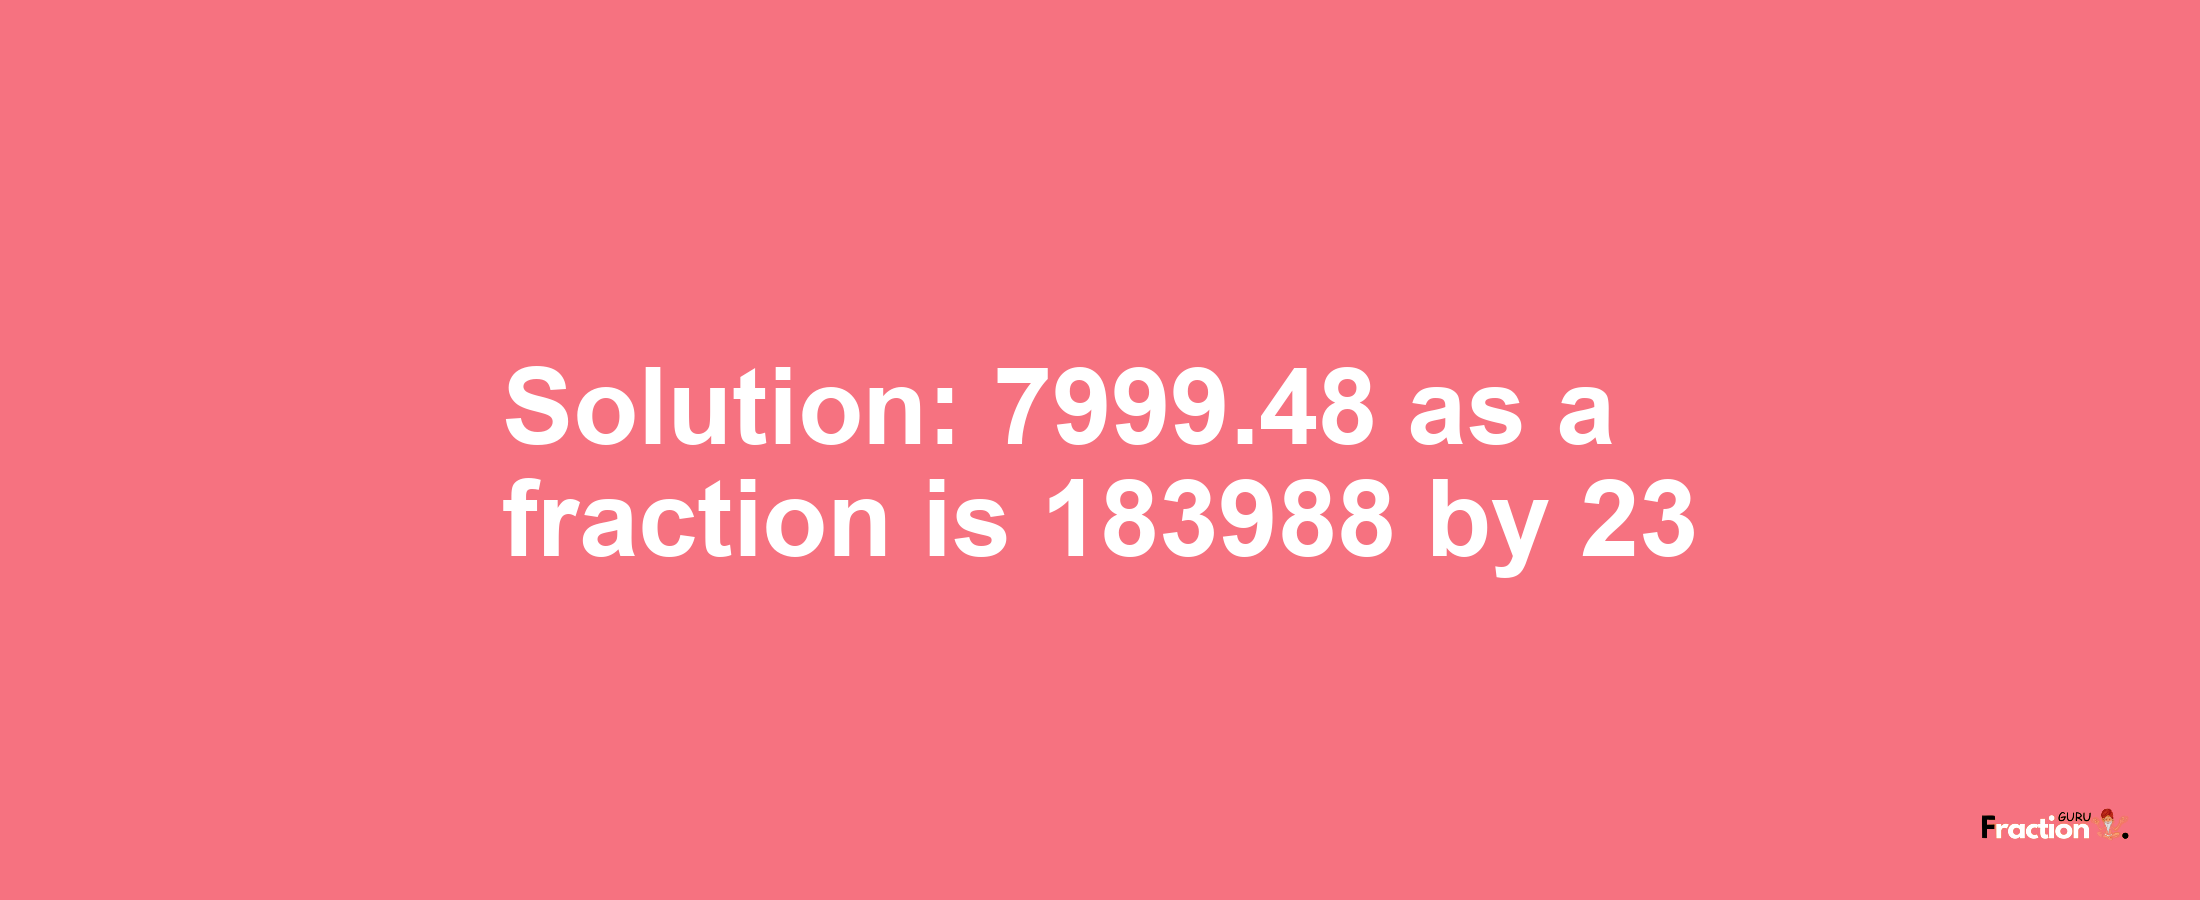 Solution:7999.48 as a fraction is 183988/23